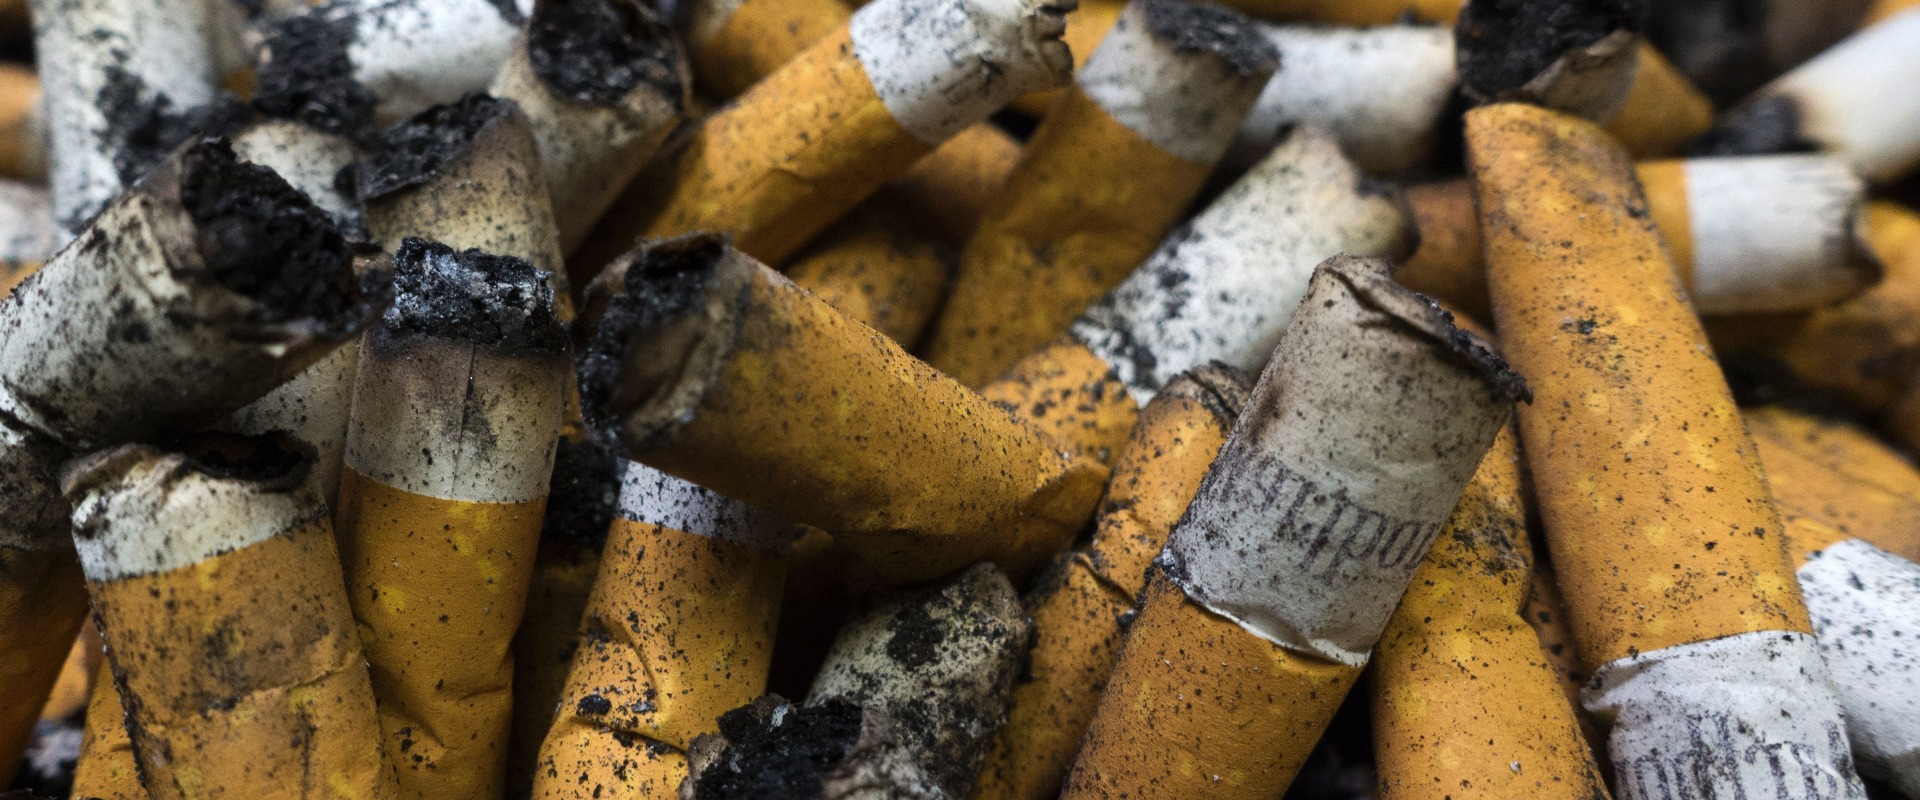 Why is Tobacco Regulated by the FDA?